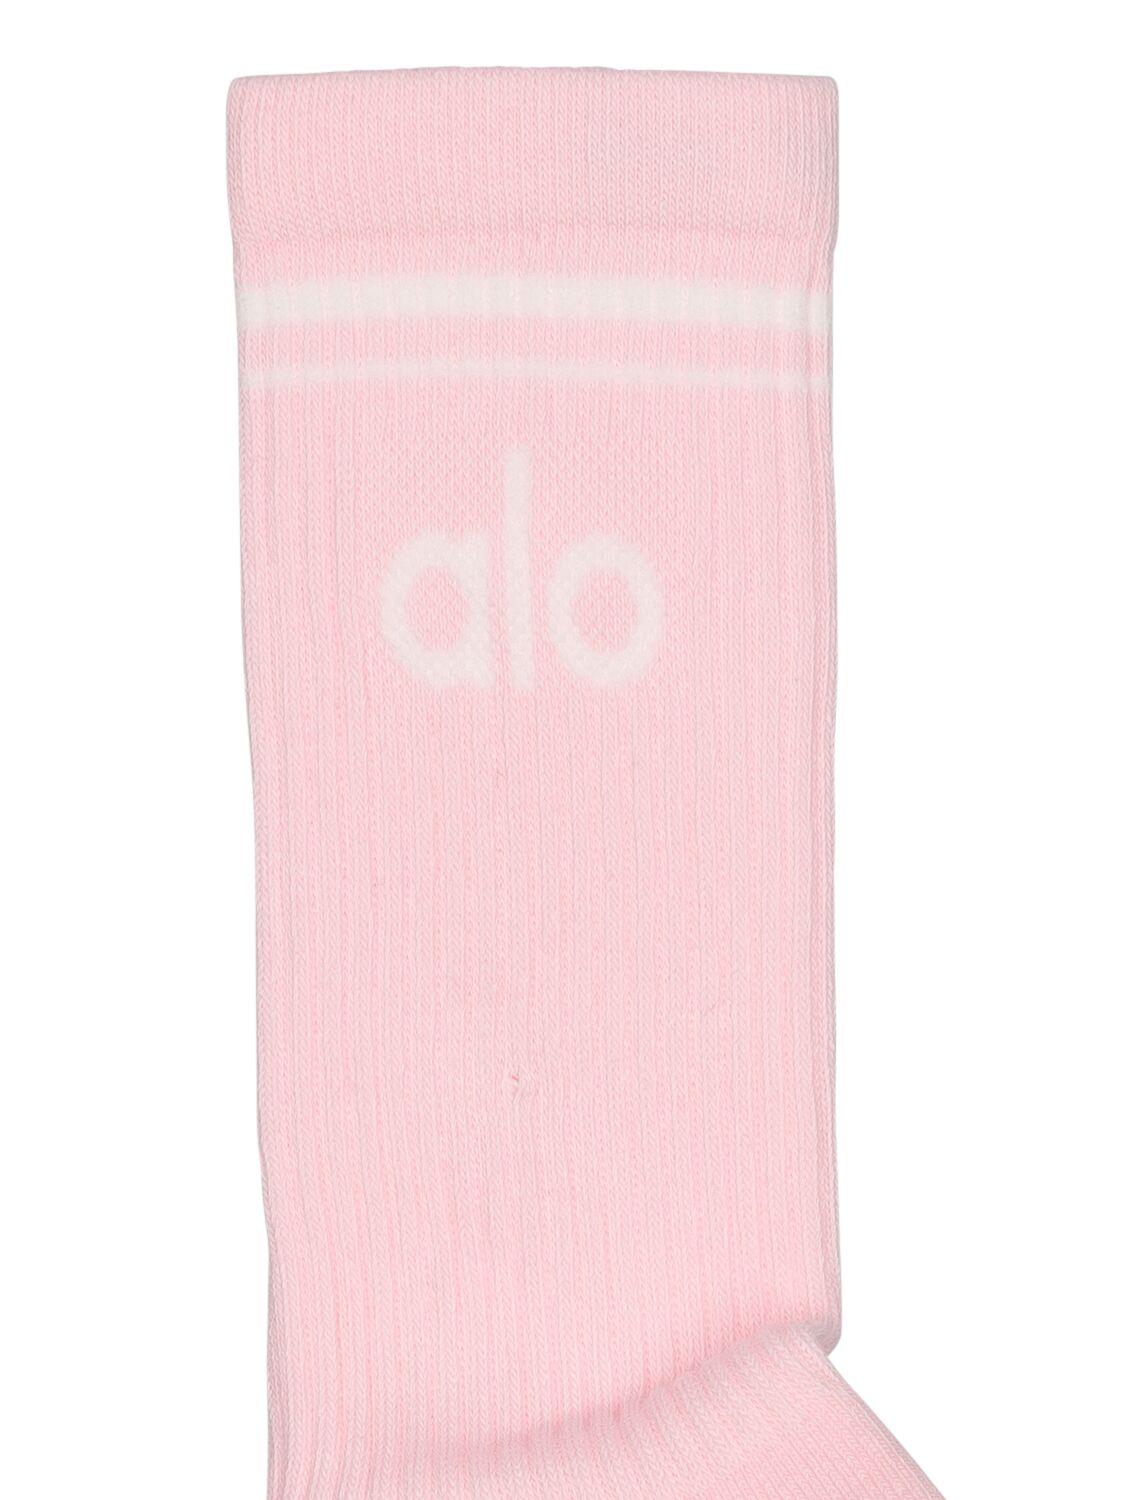 Alo Yoga Throwback Cotton Blend Socks in Pink